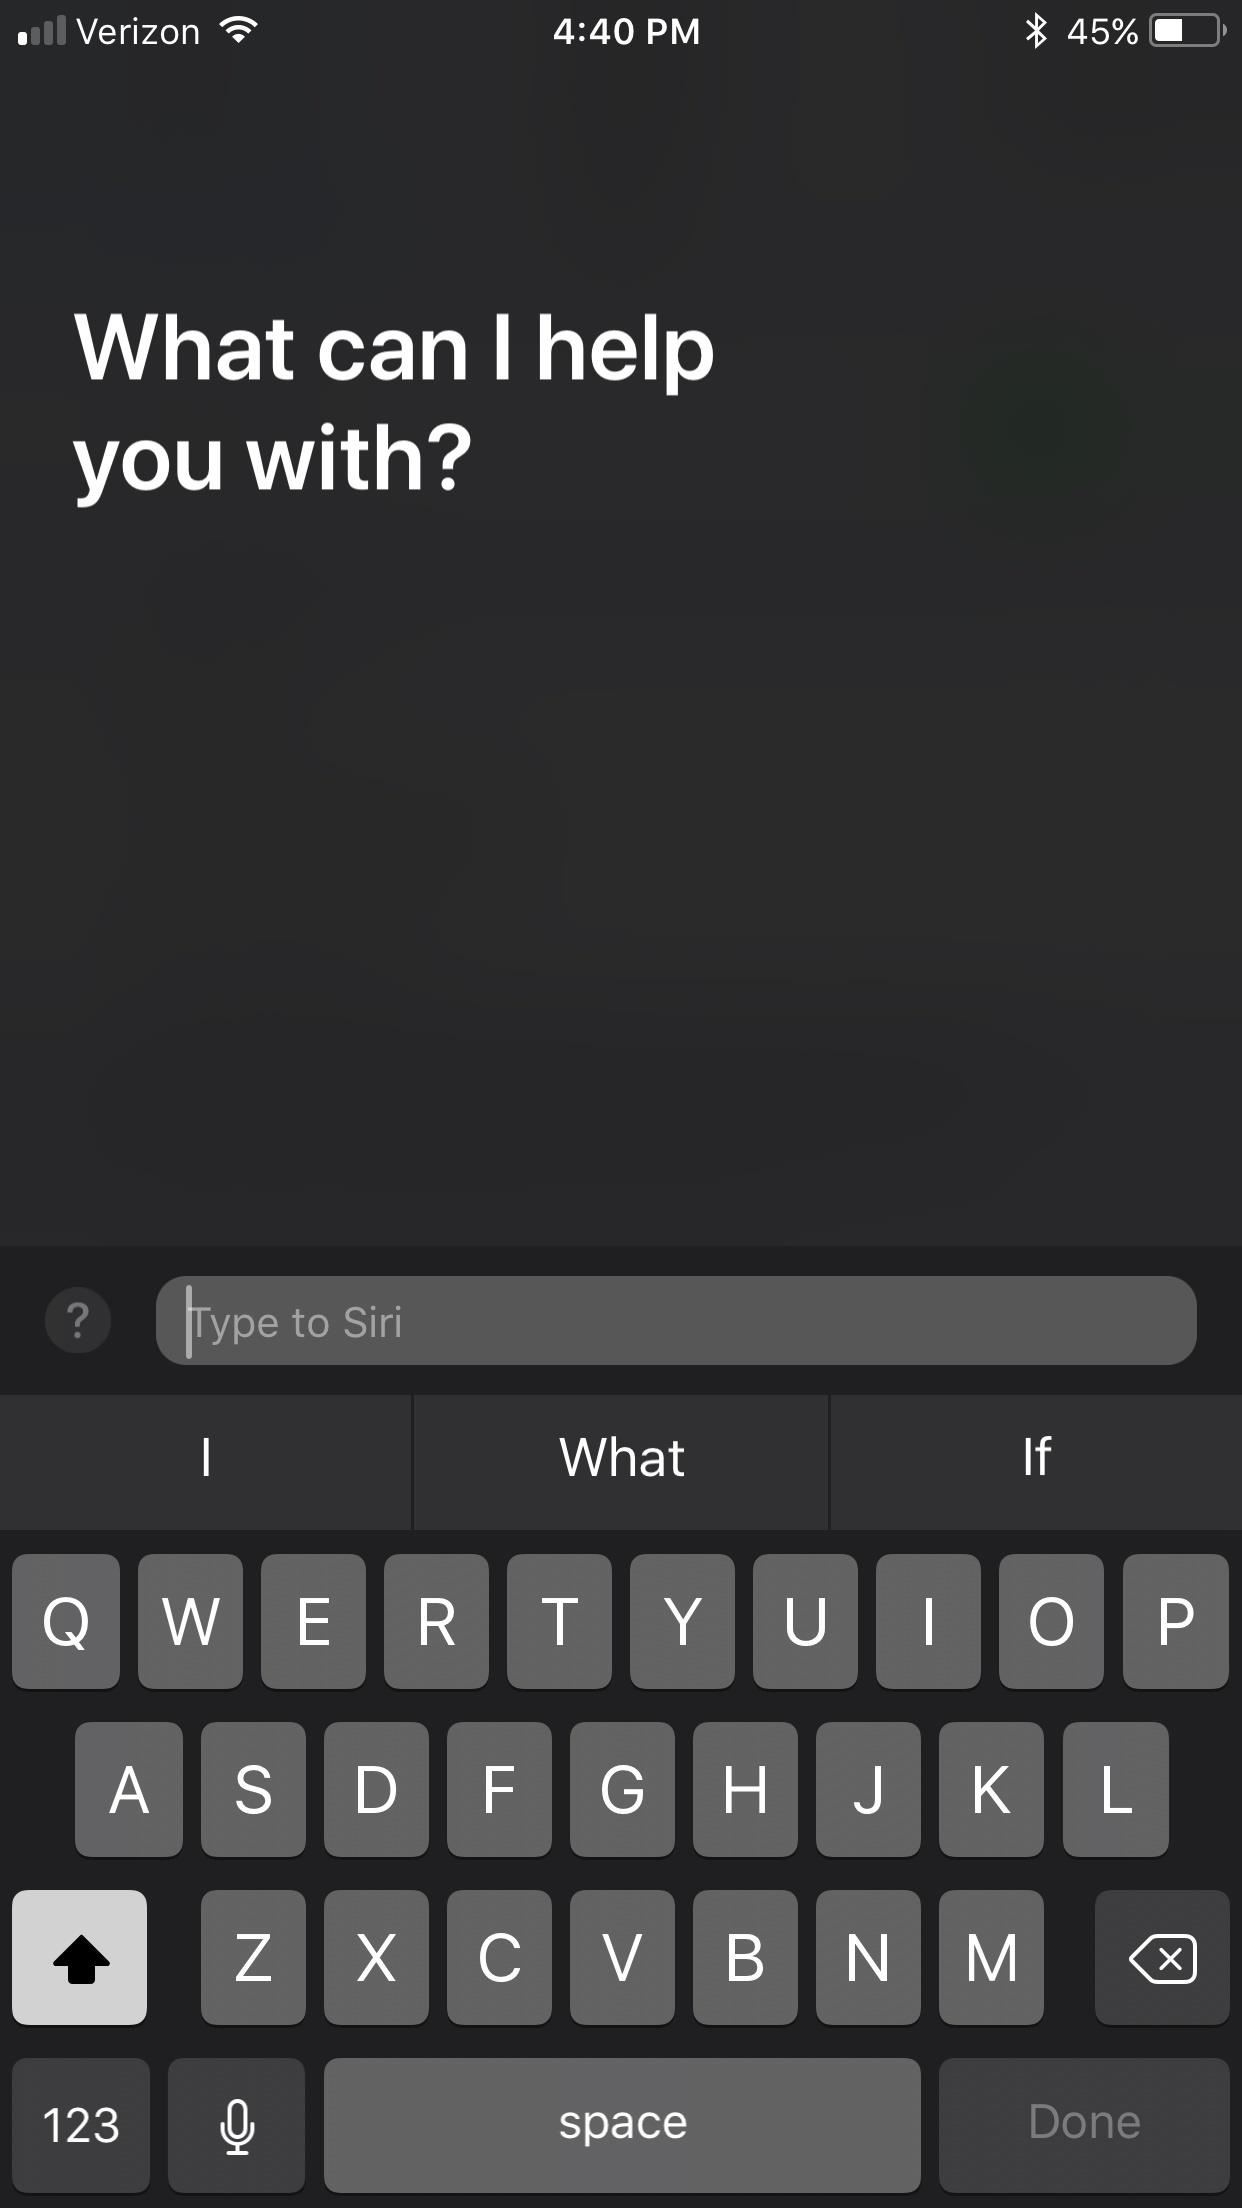 Siri 101: How to Type Requests to Siri When You Can't Speak